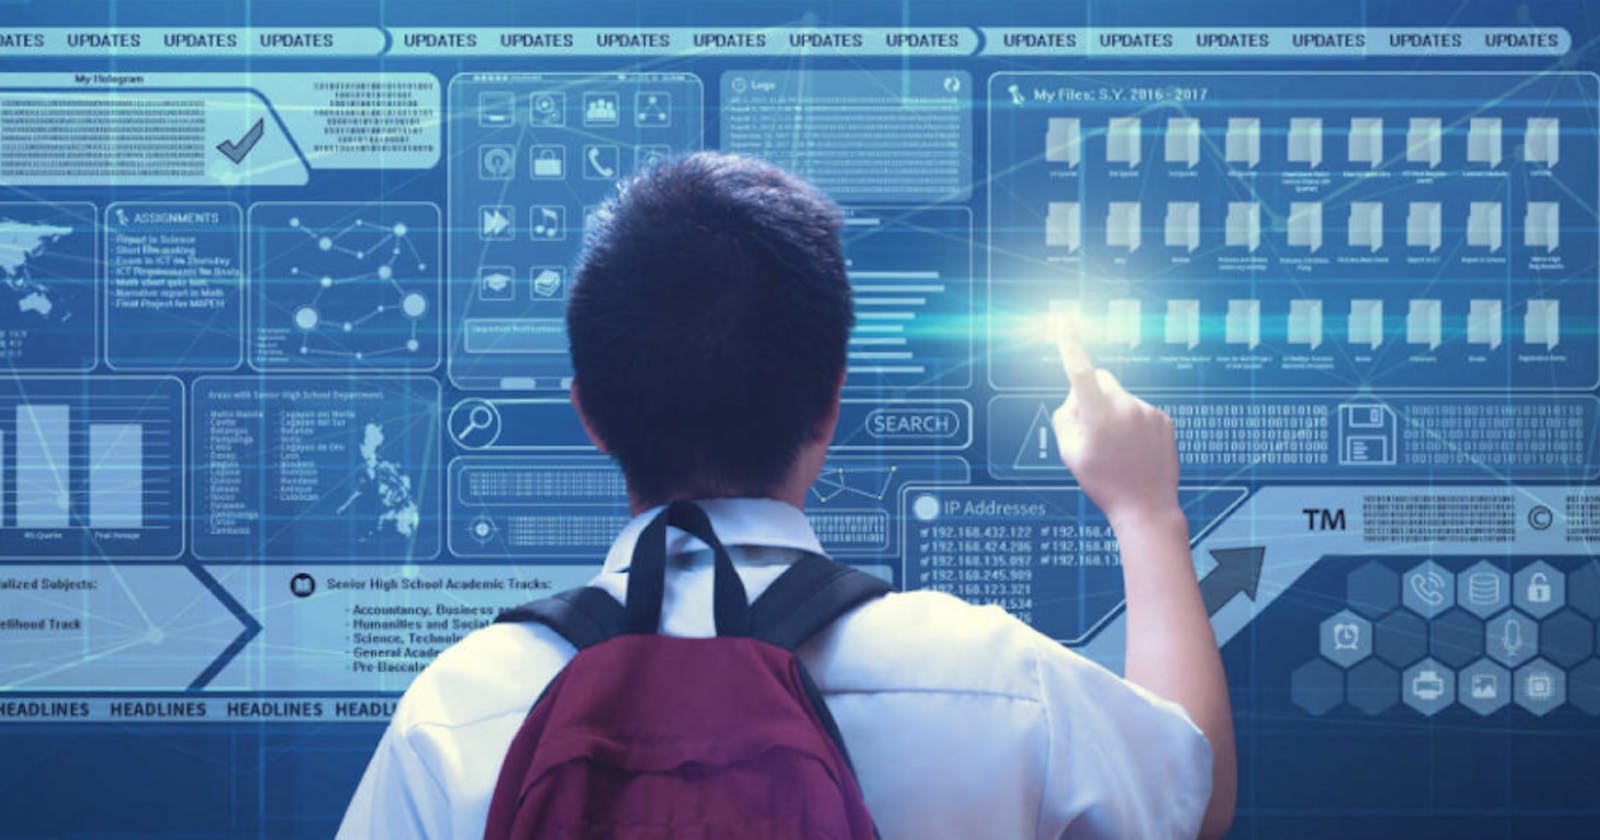 Technology in Education - trends. Edtech - the Future of E-learning Software